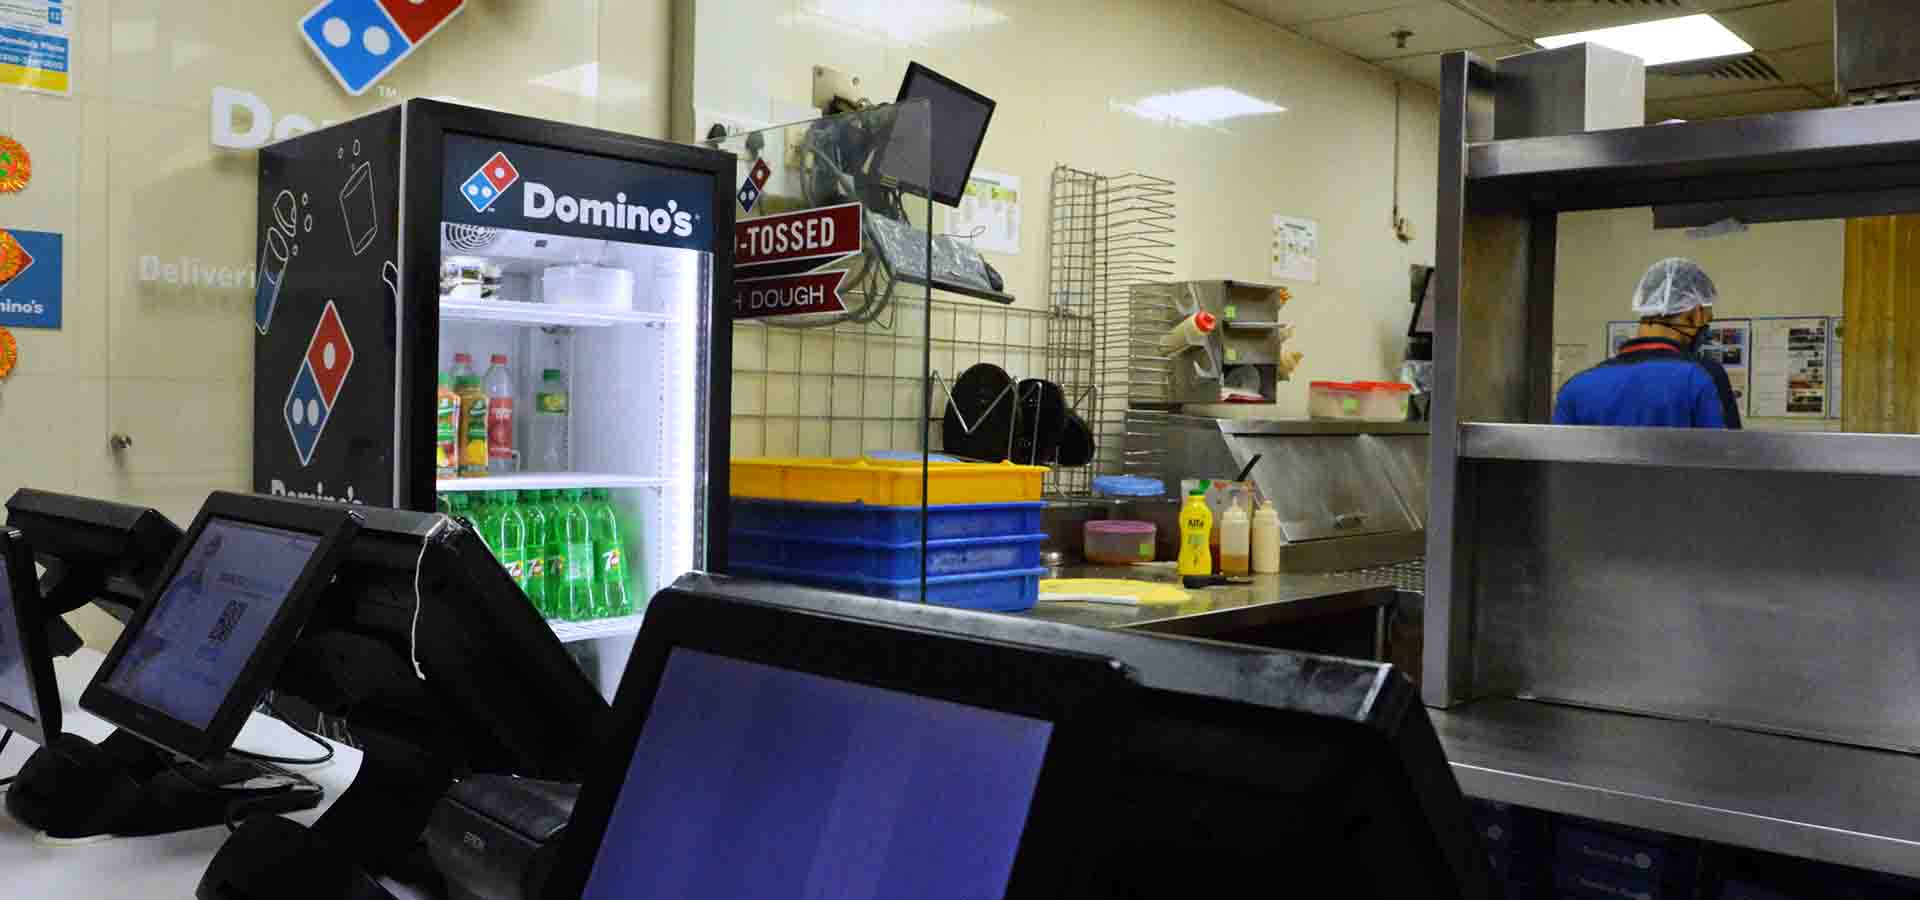 Dominos store photos in mall